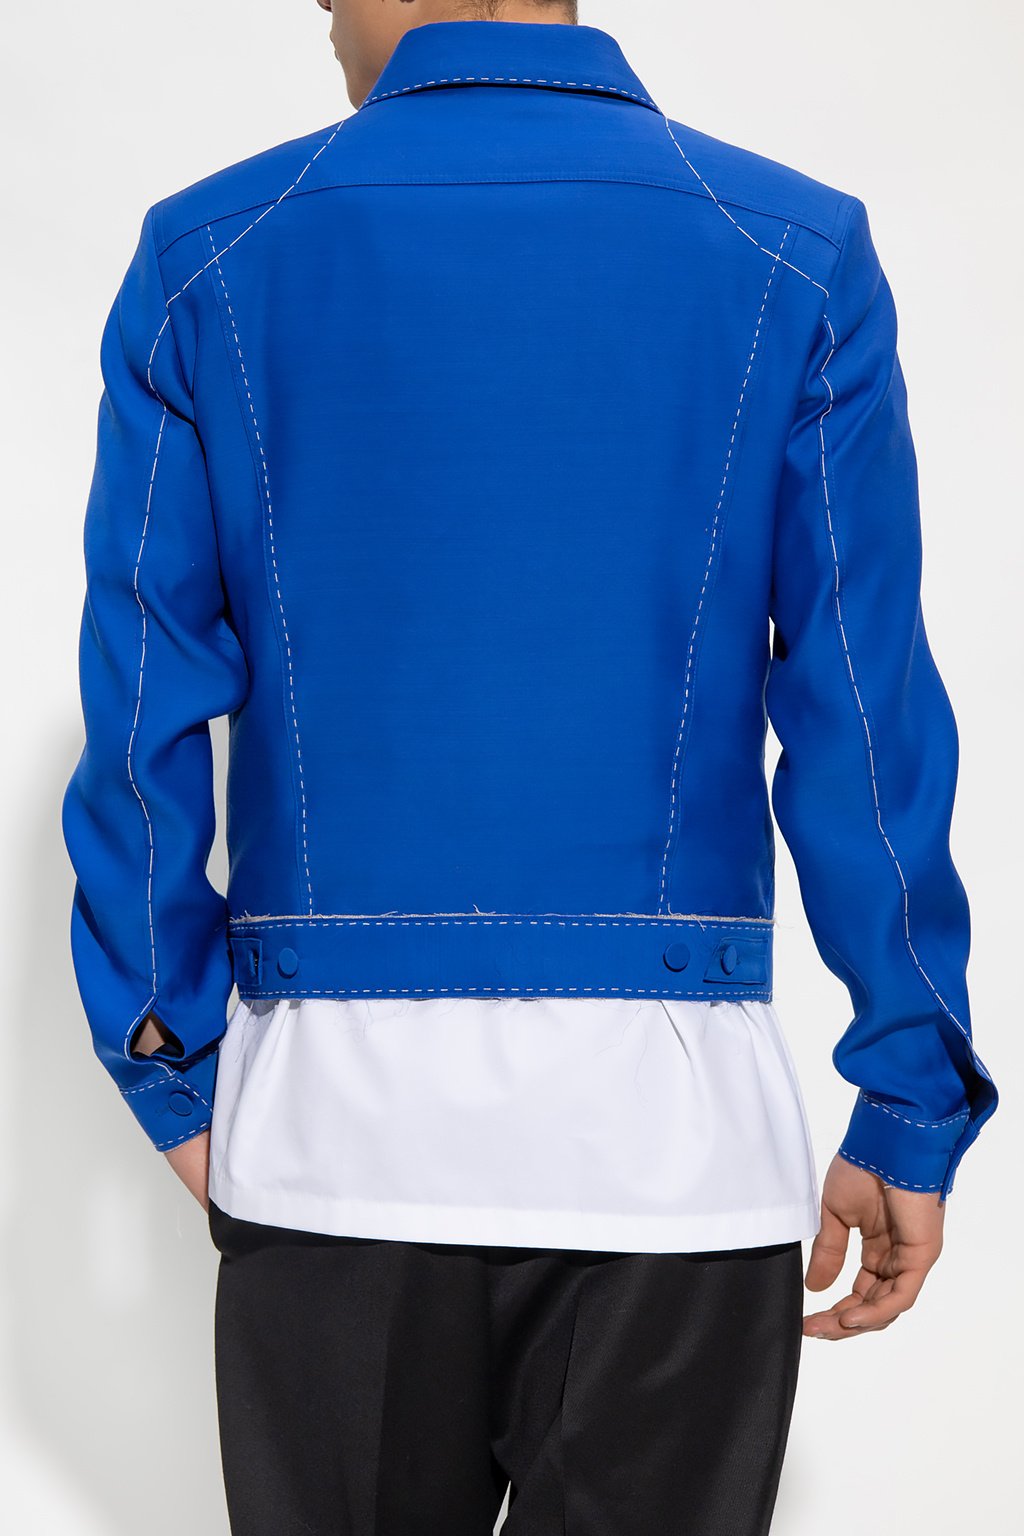 Off-White Contrasting Stitch Jacket